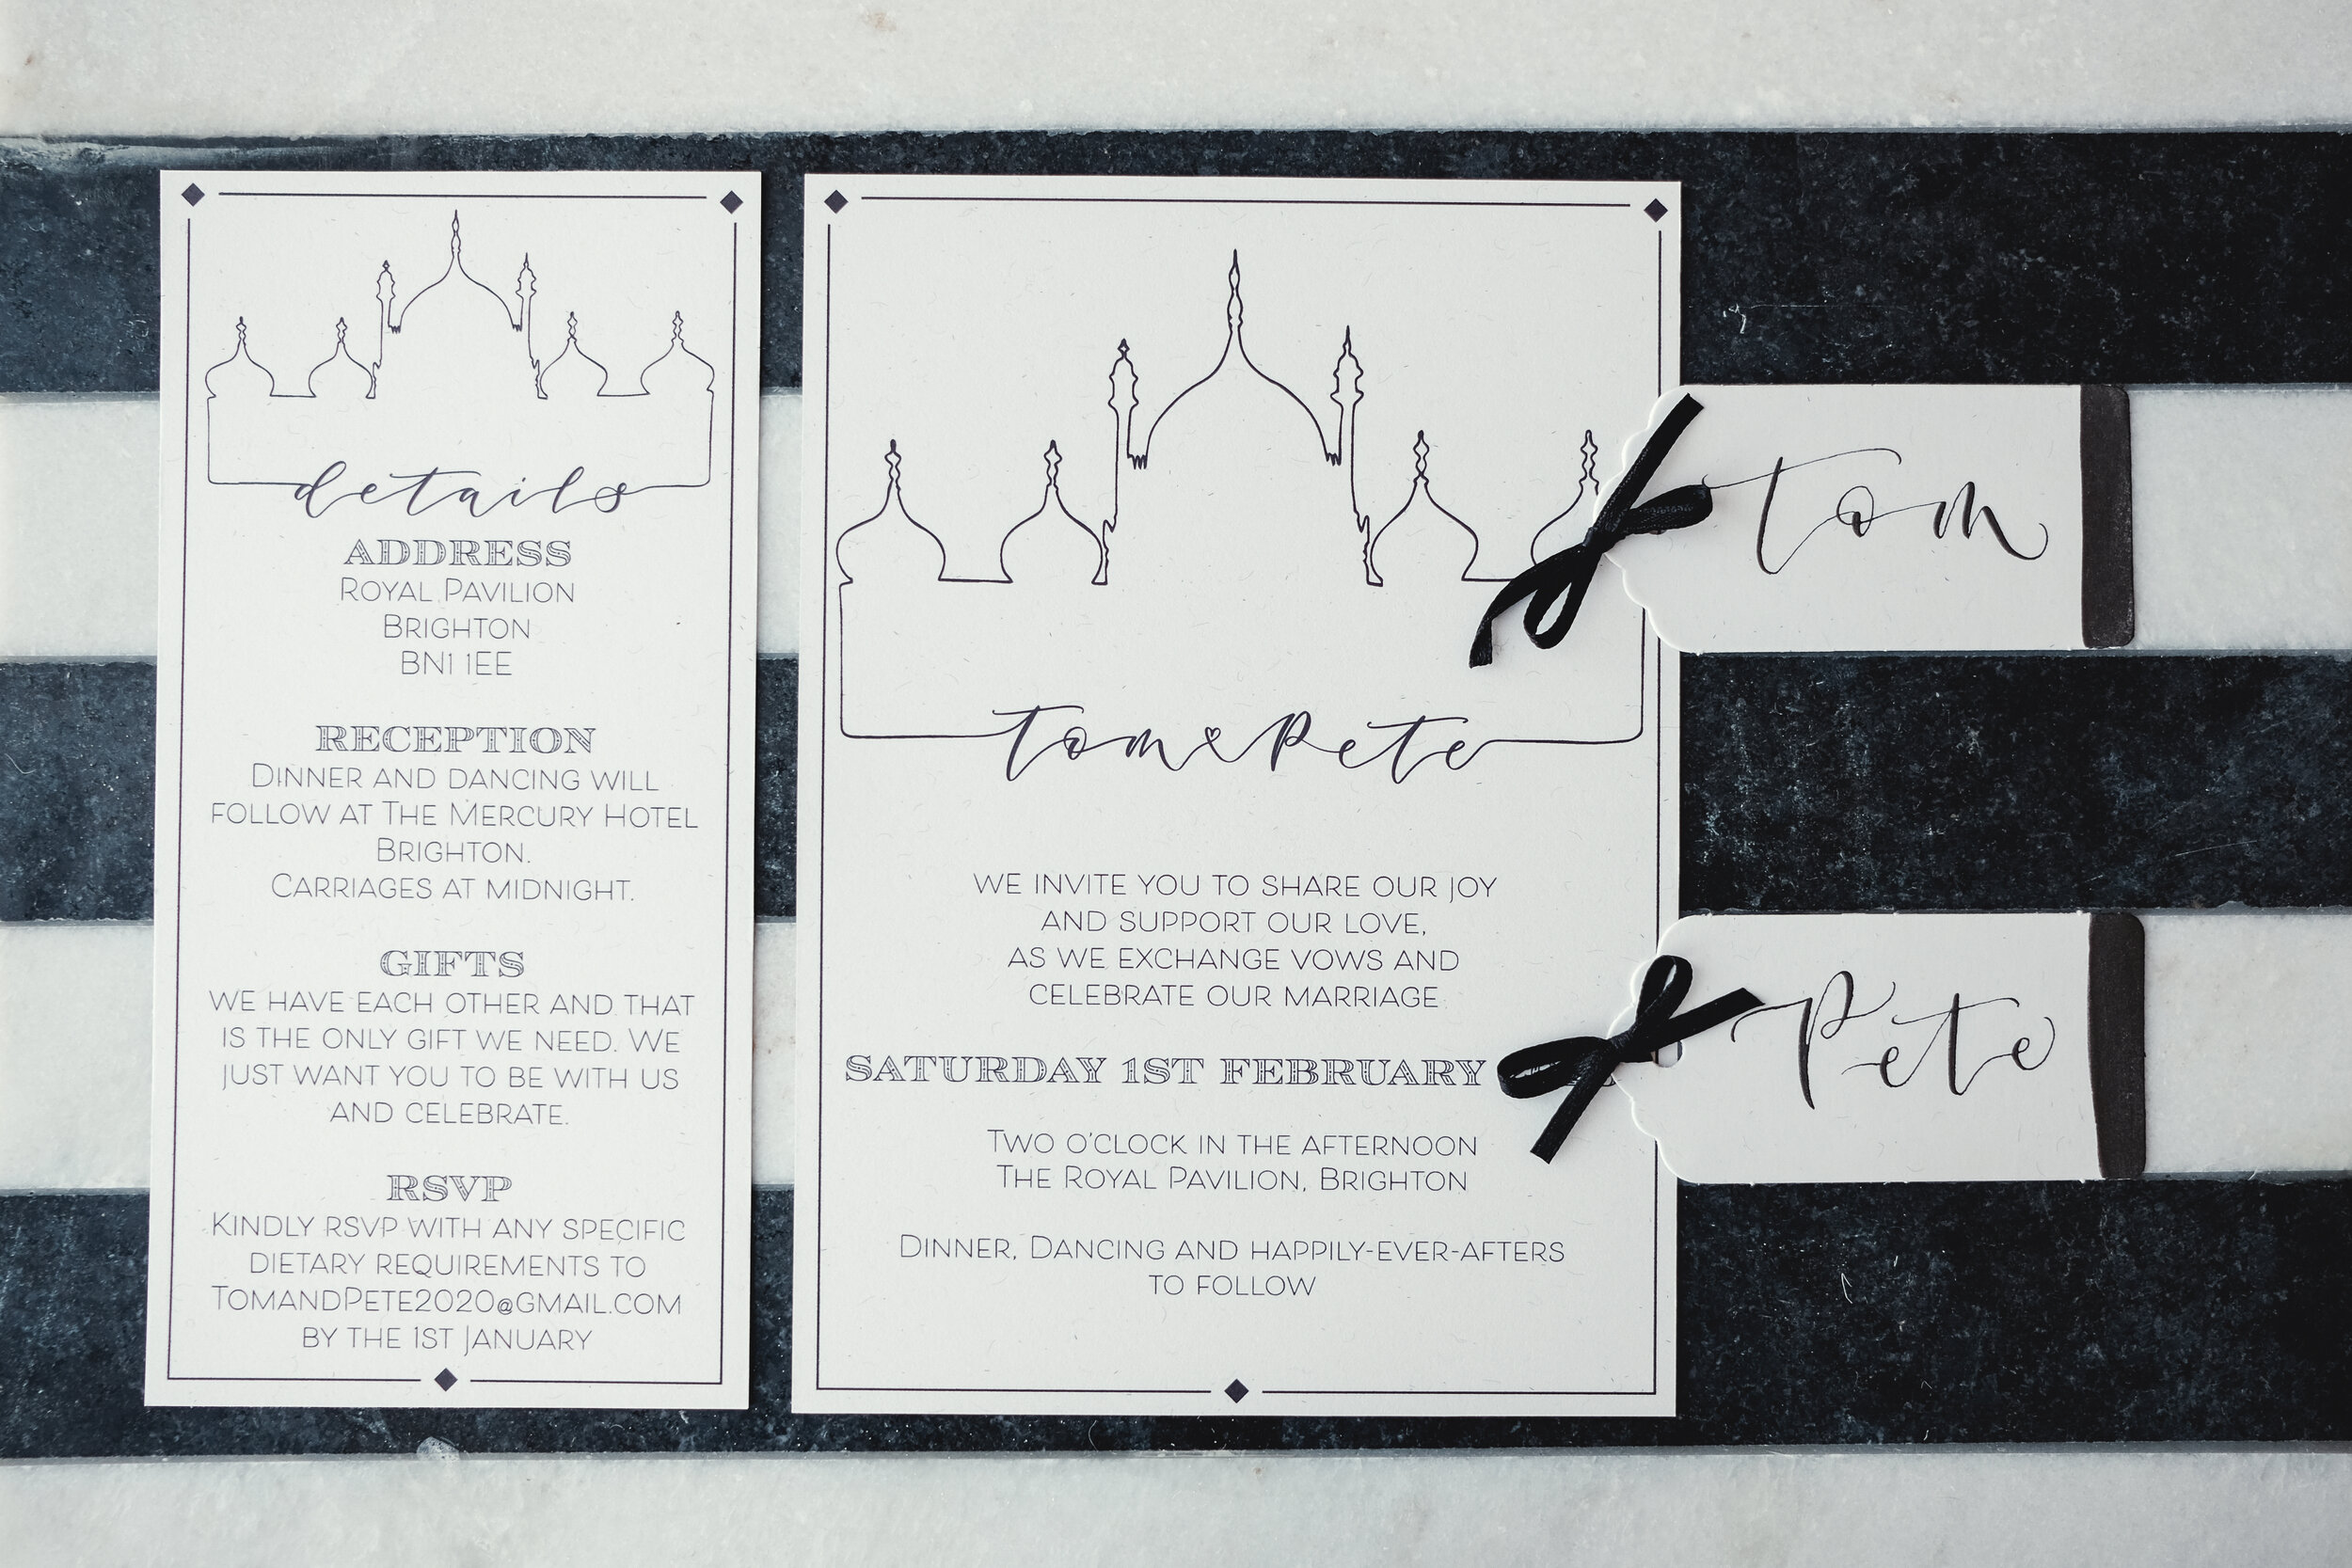 Monochrome minimalist wedding stationery - Brighton Pavilion invitations with black calligraphy place cards by The Amyverse.jpg